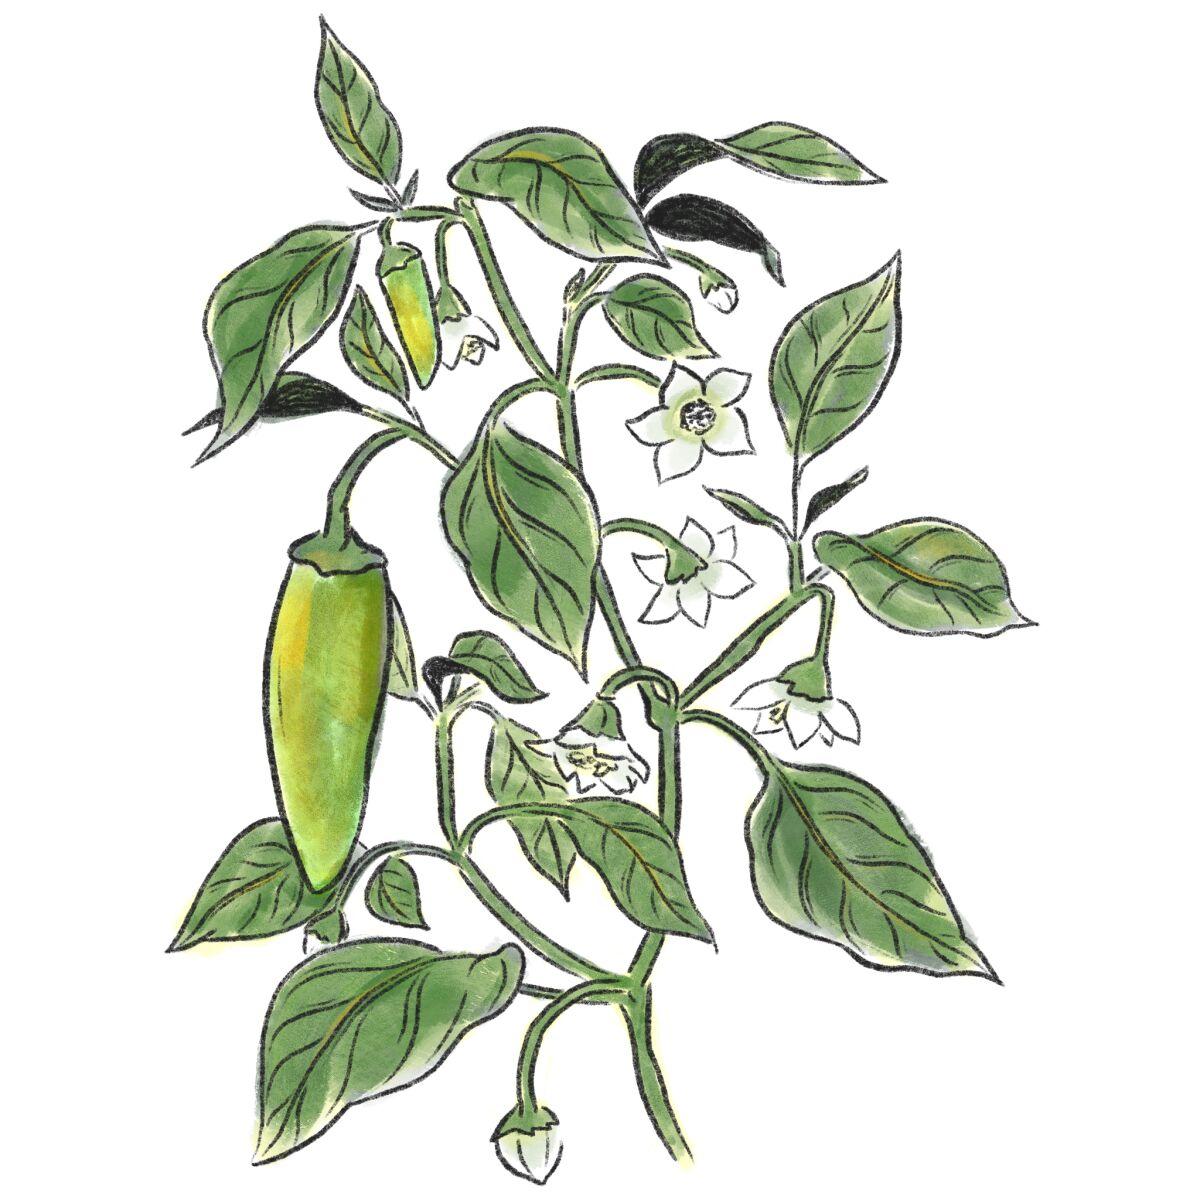 An illustration of a jalapeño growing on a plant with leaves and blooming flowers 